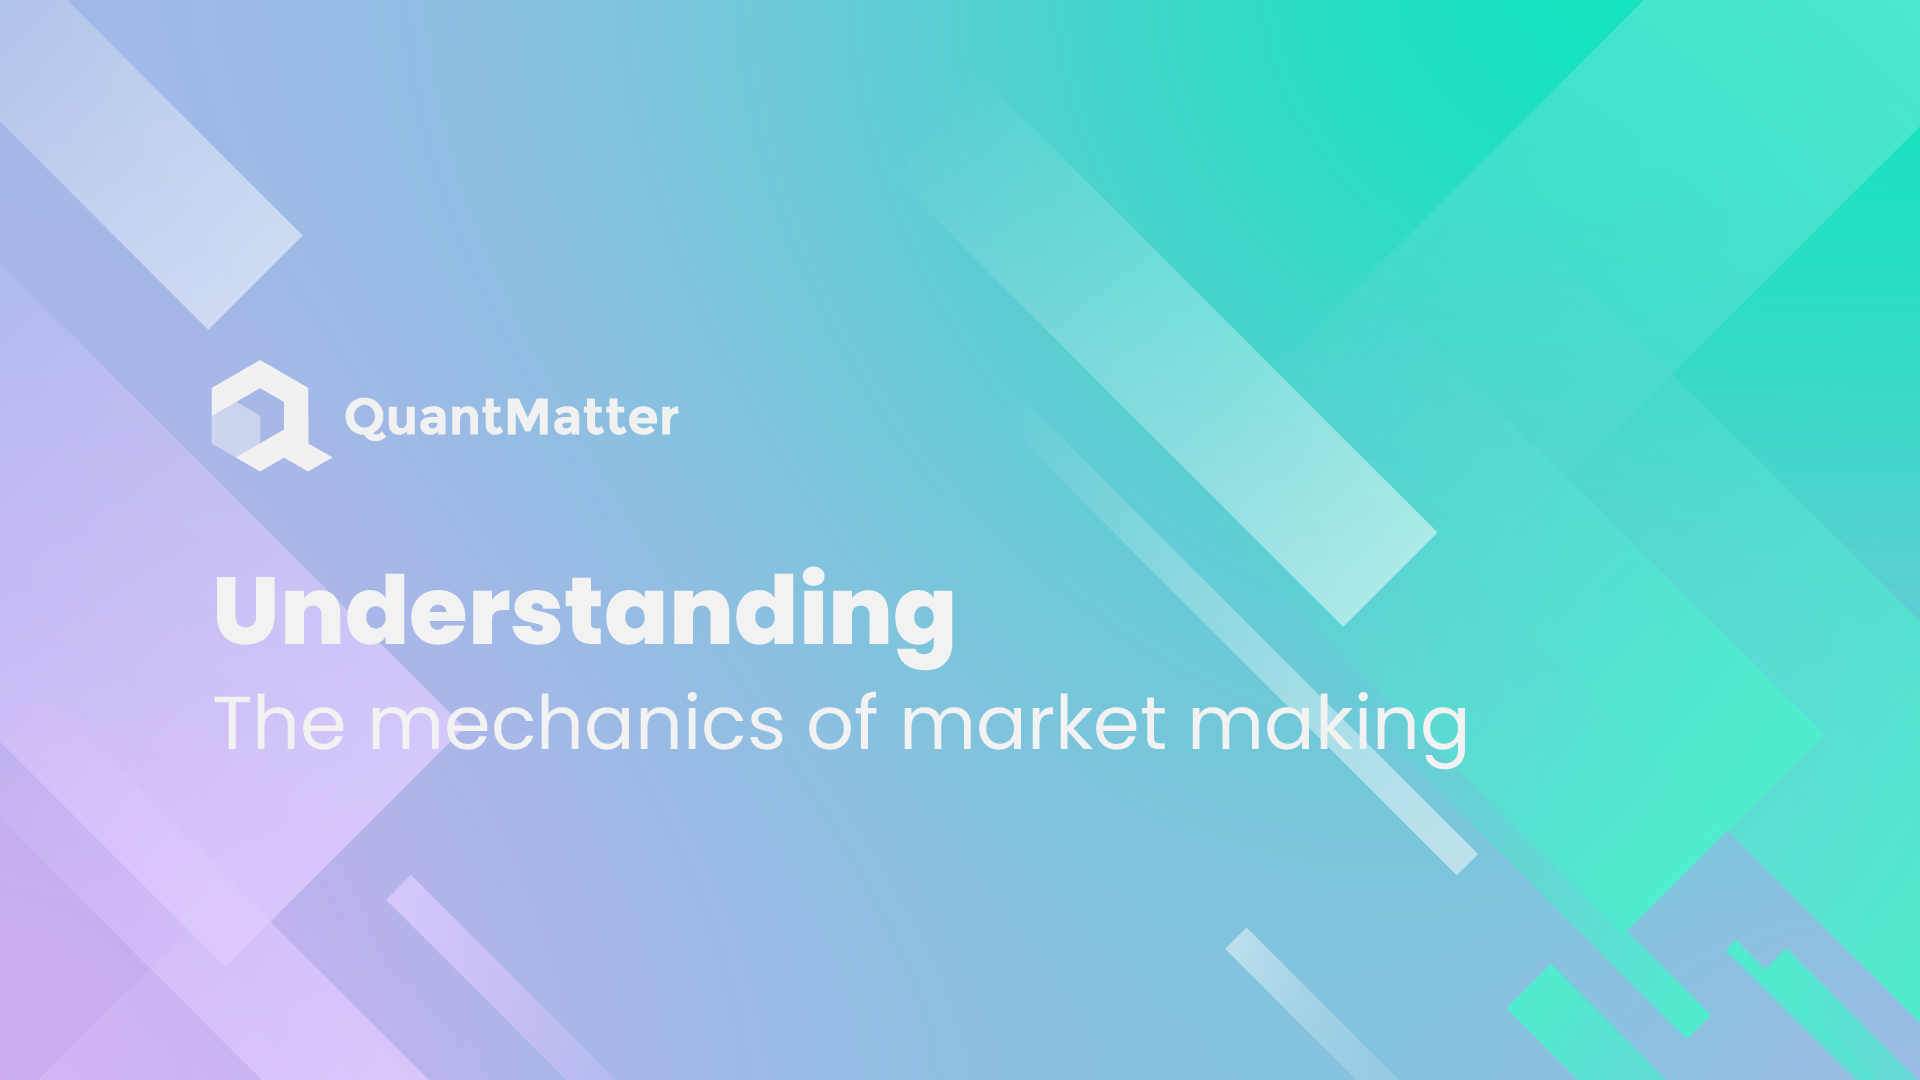 How Does Market Making Works?